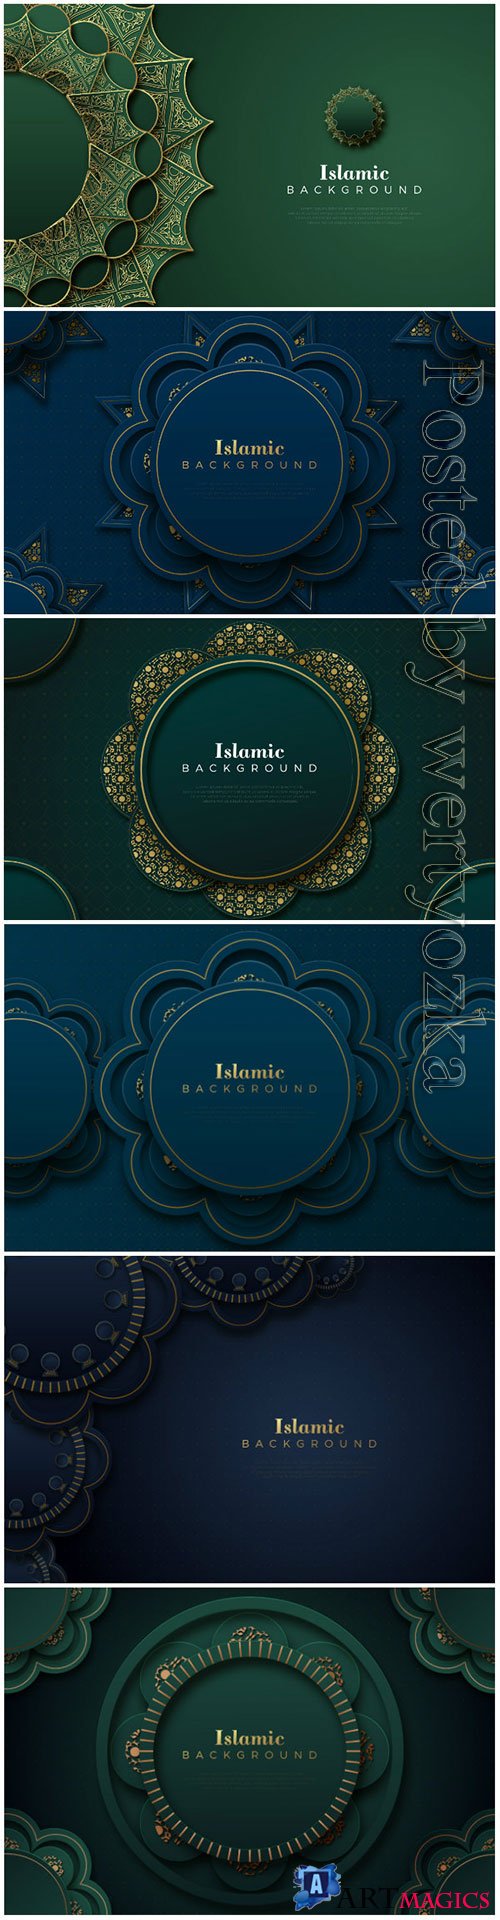 Islamic vector background with classic ornaments